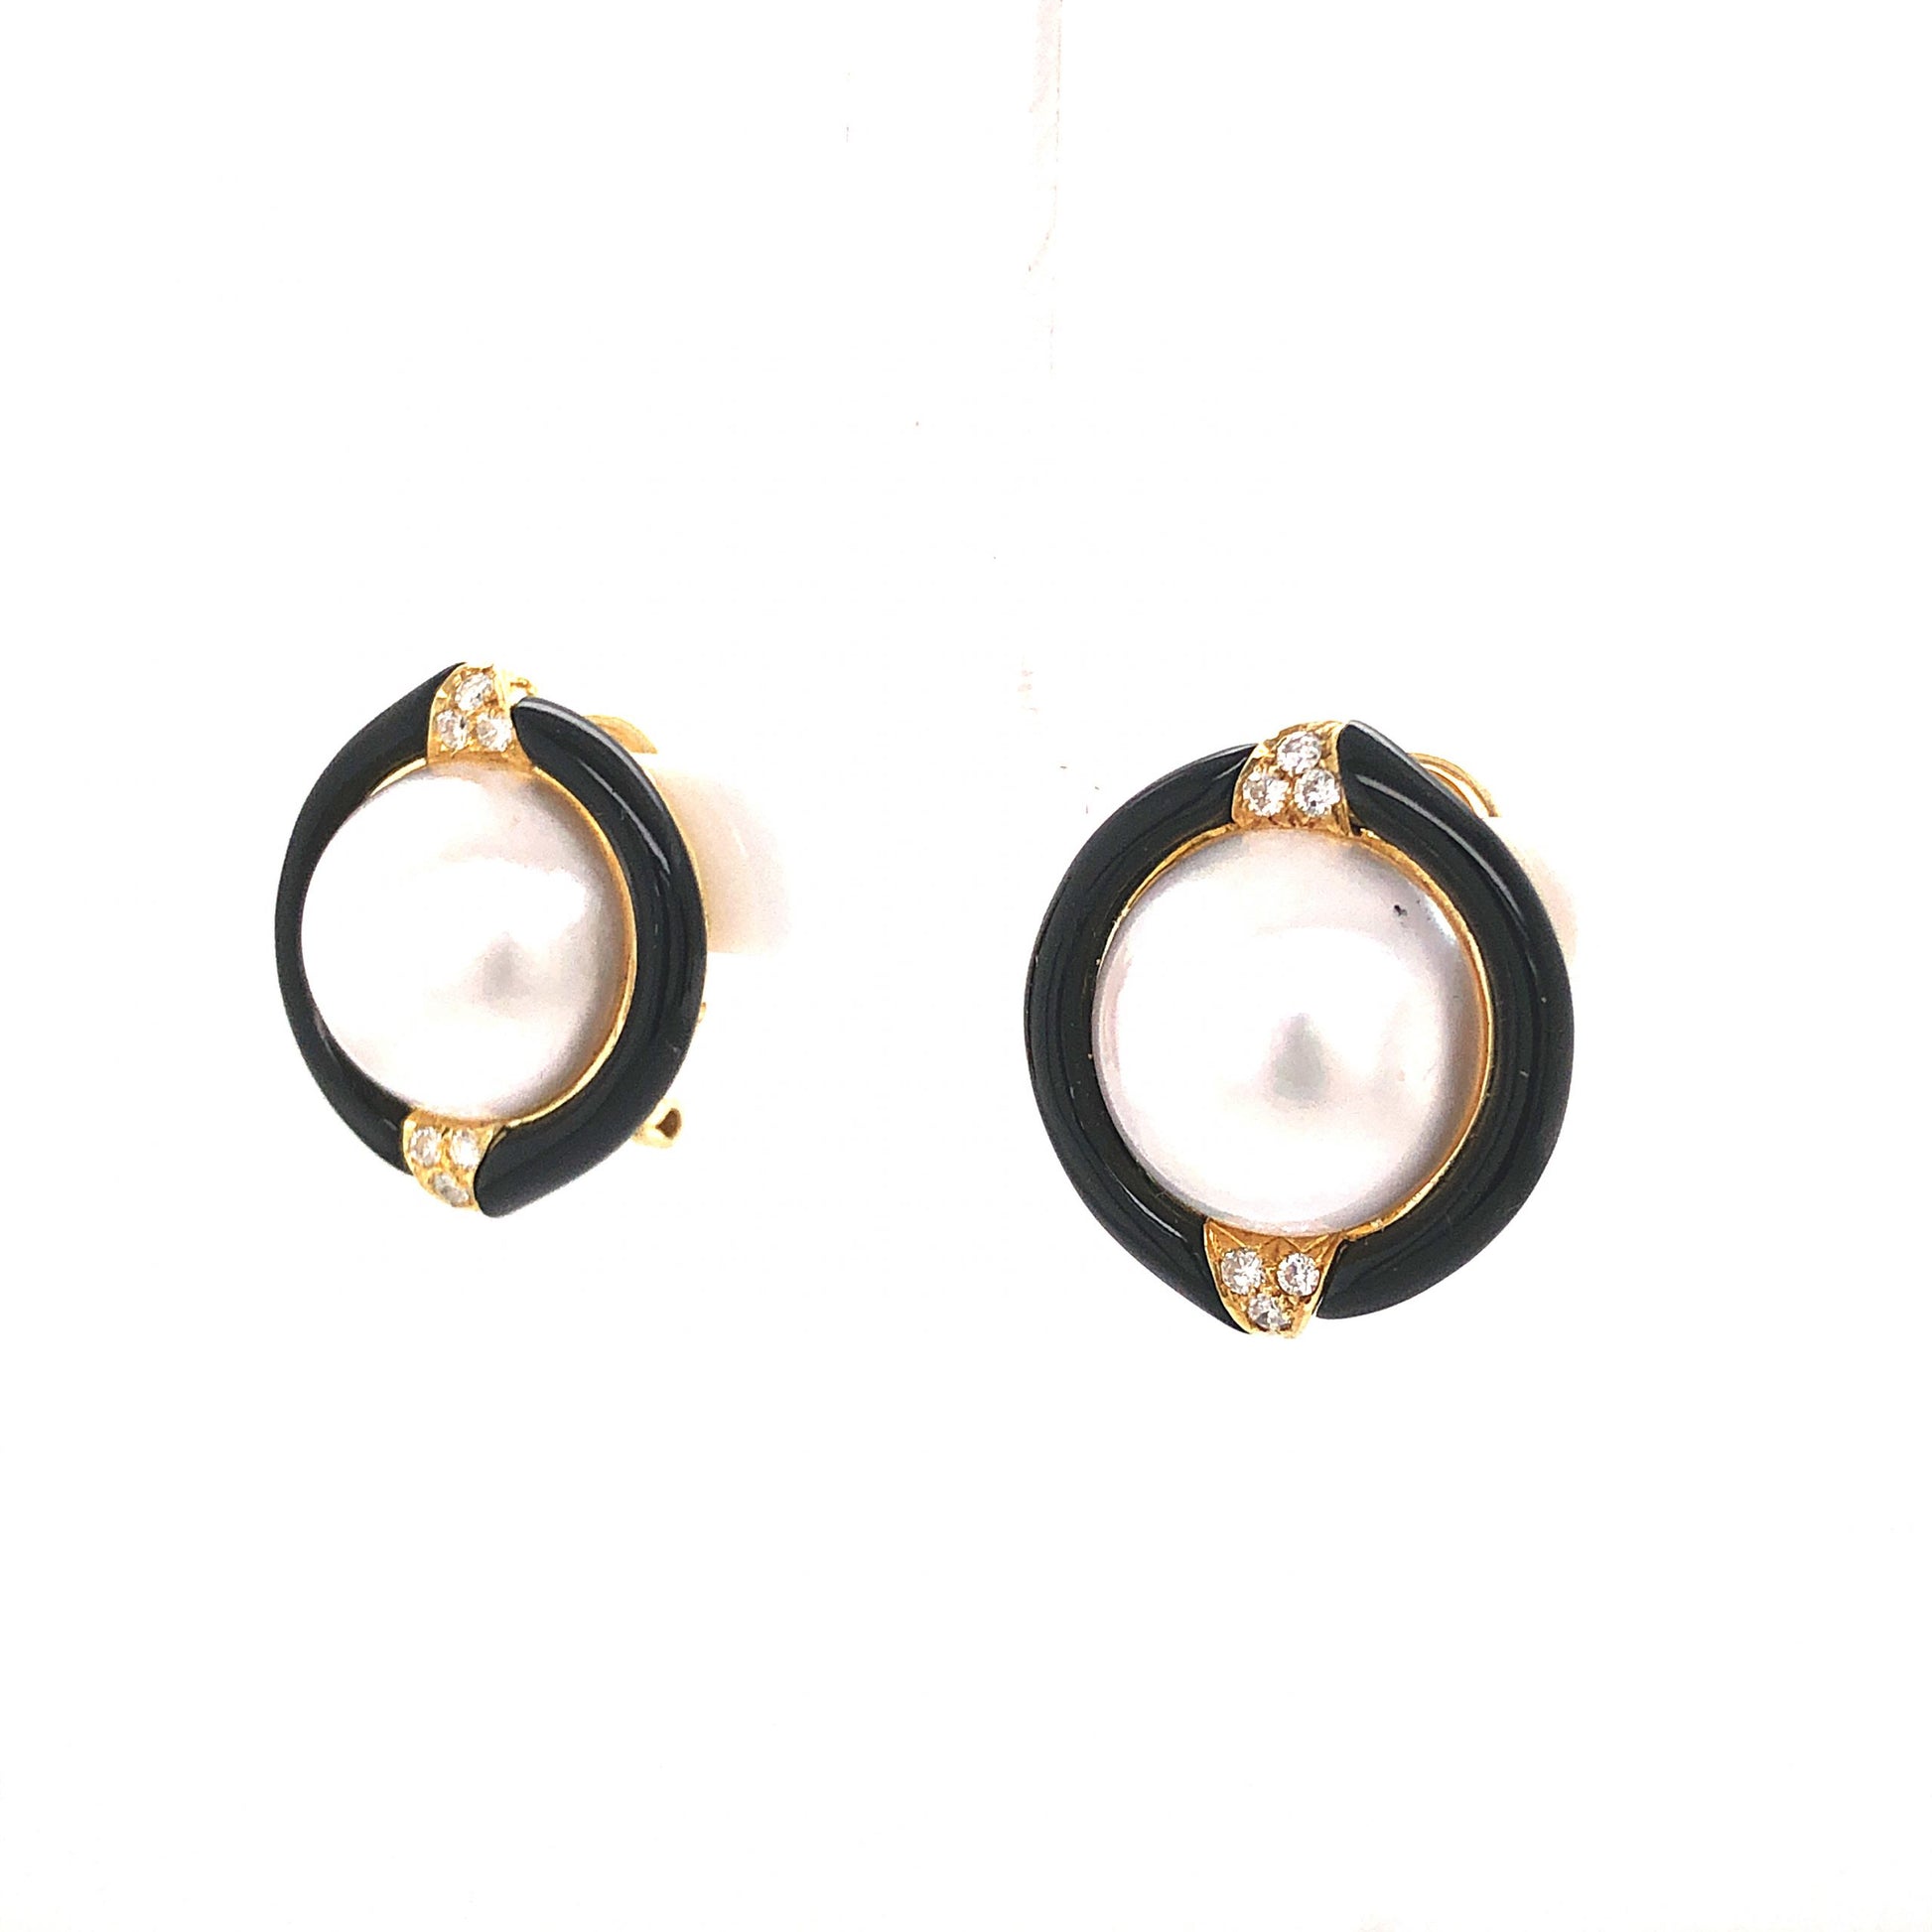 Pearl & Onyx Earrings w/ Diamonds in 18k Yellow GoldComposition: 18 Karat Yellow Gold Total Diamond Weight: .24ct Total Gram Weight: 13.1 g